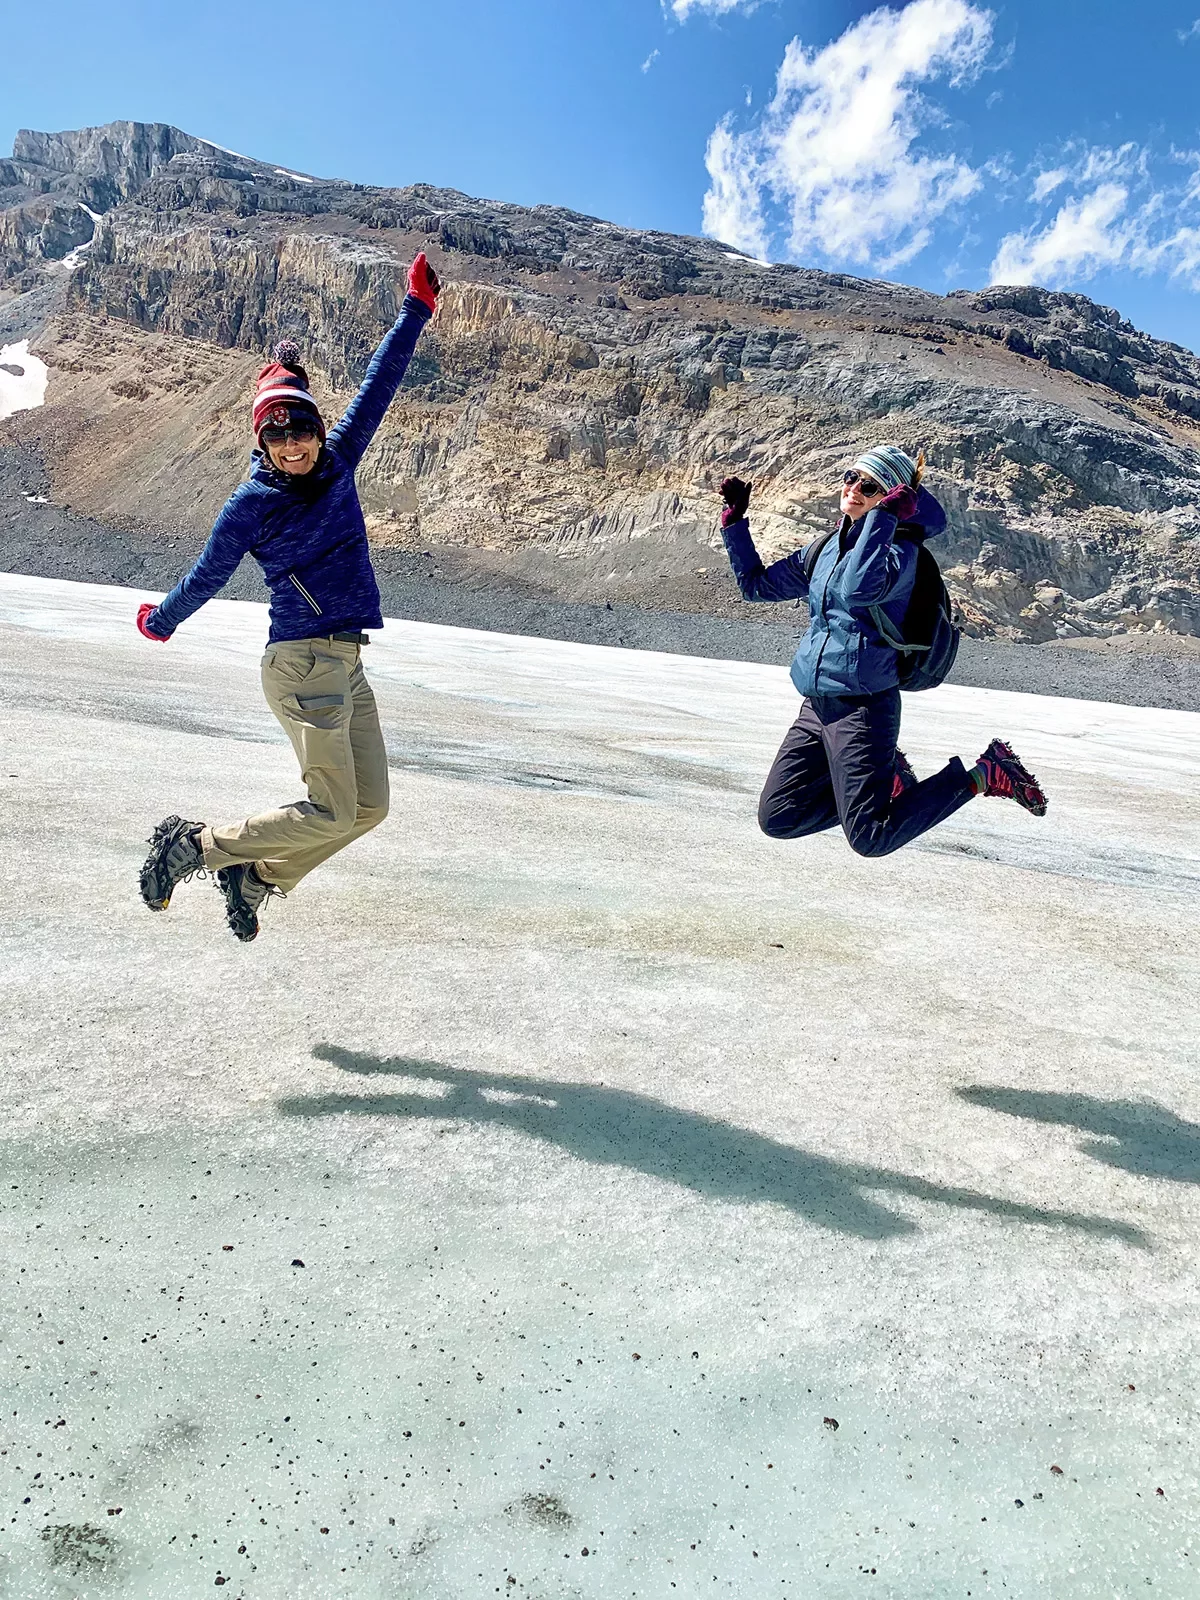 Two guests jumping in air on ice shelf.